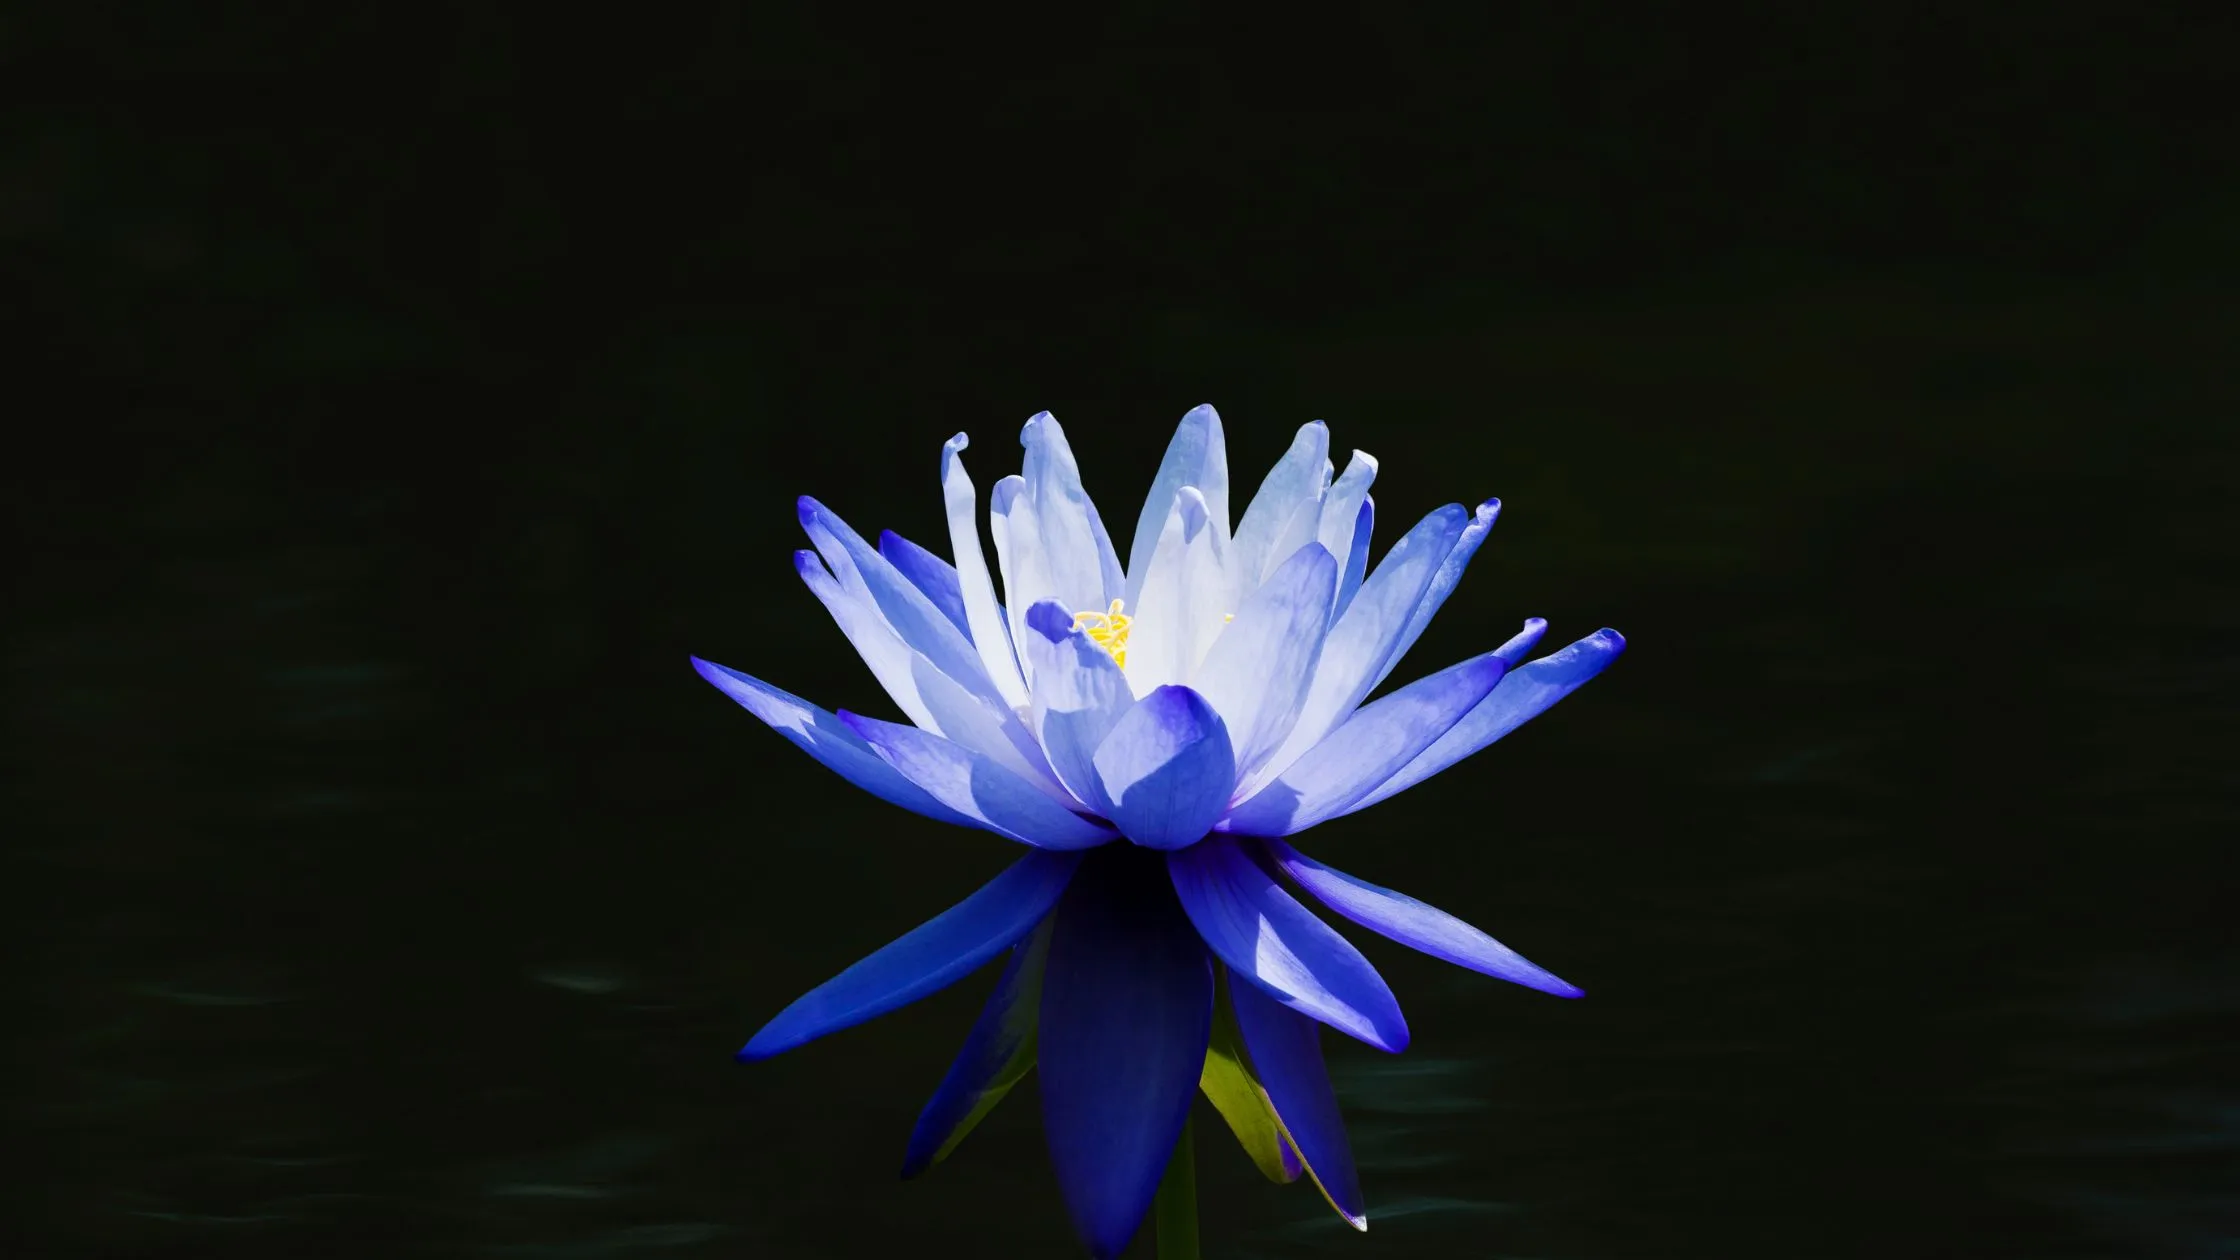 What is the Mystique Behind the Blue Lotus Flower